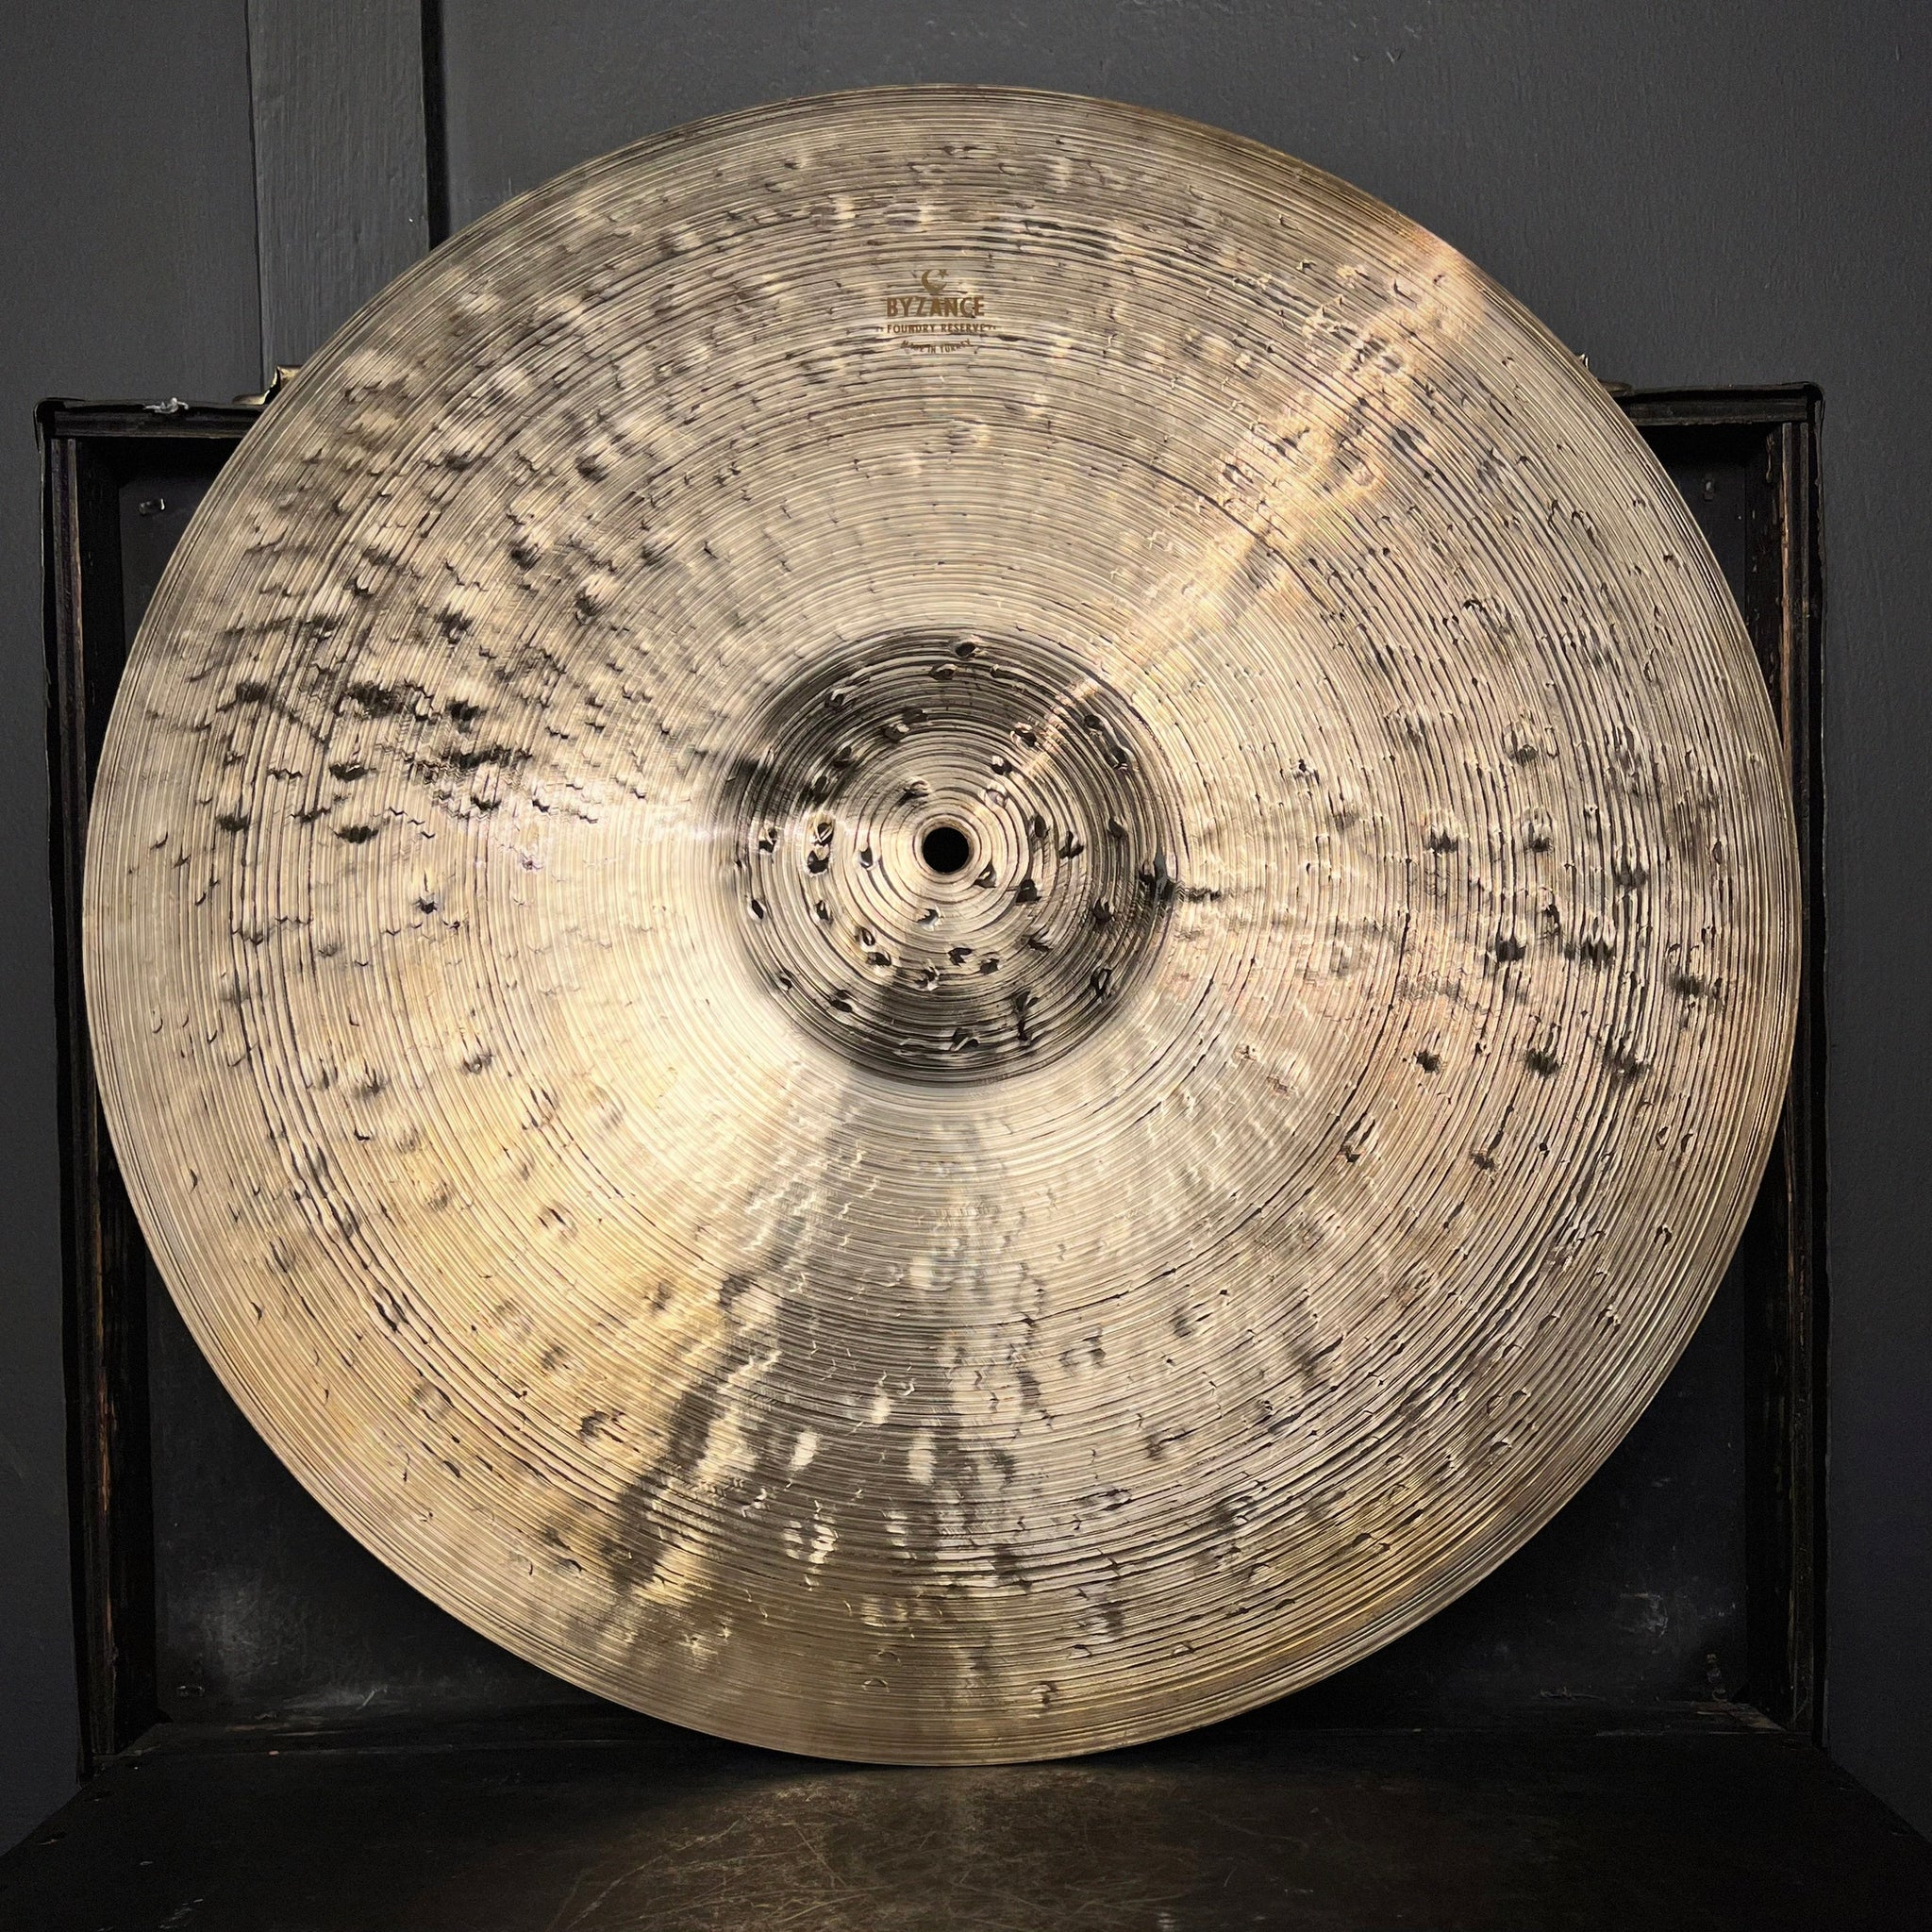 NEW Meinl 20" Byzance Foundry Reserve Ride Cymbal - 2130g